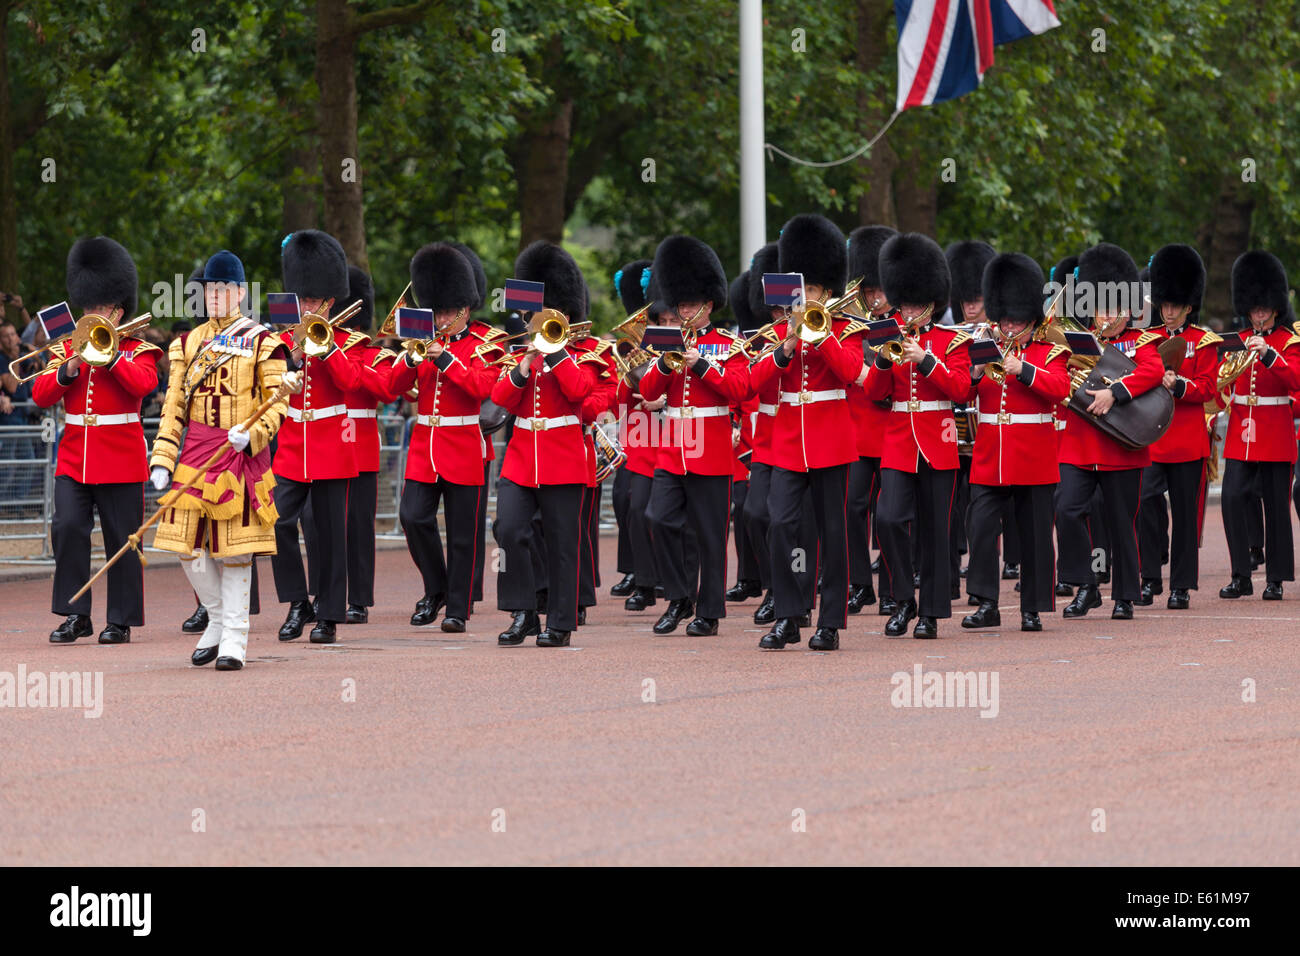 Musicians of the Royal Foot Guards band marching along The Mall in London during the Trooping the Colour ceremony Stock Photo